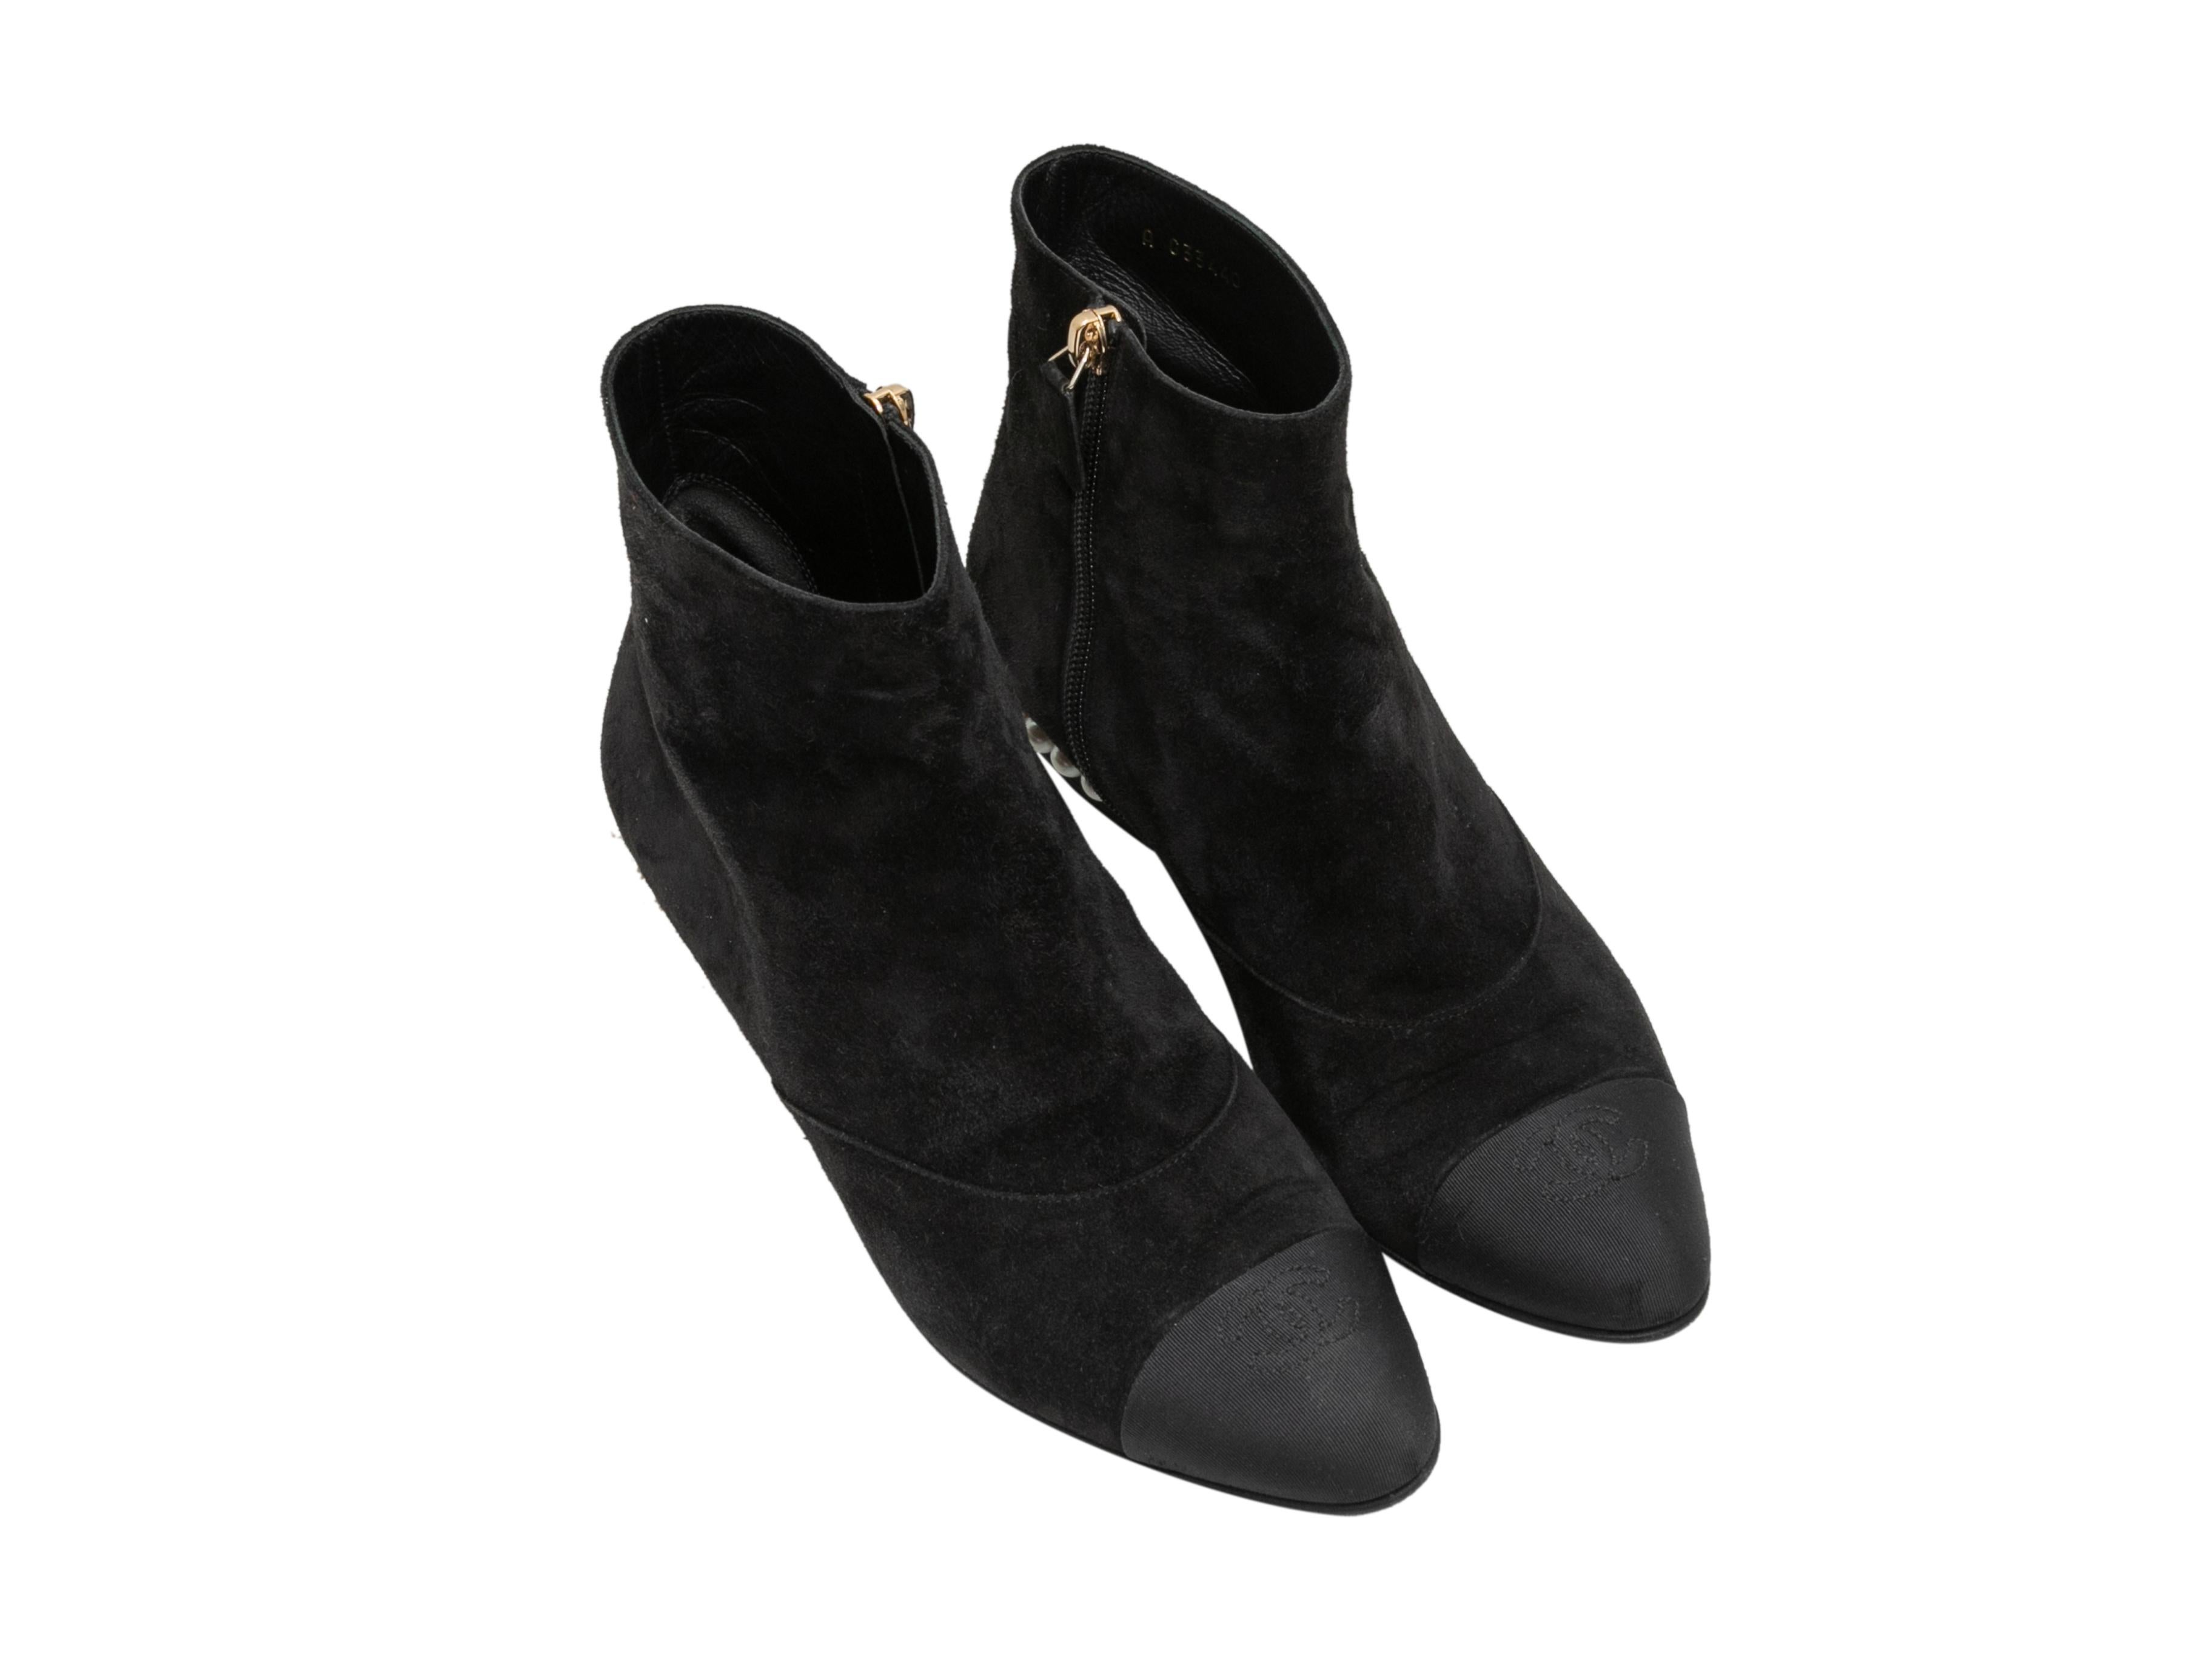 Black suede cap-toe ankle boots by Chanel. Faux pearl accents at grosgrain block heels. Zip closures at inner sides. 5